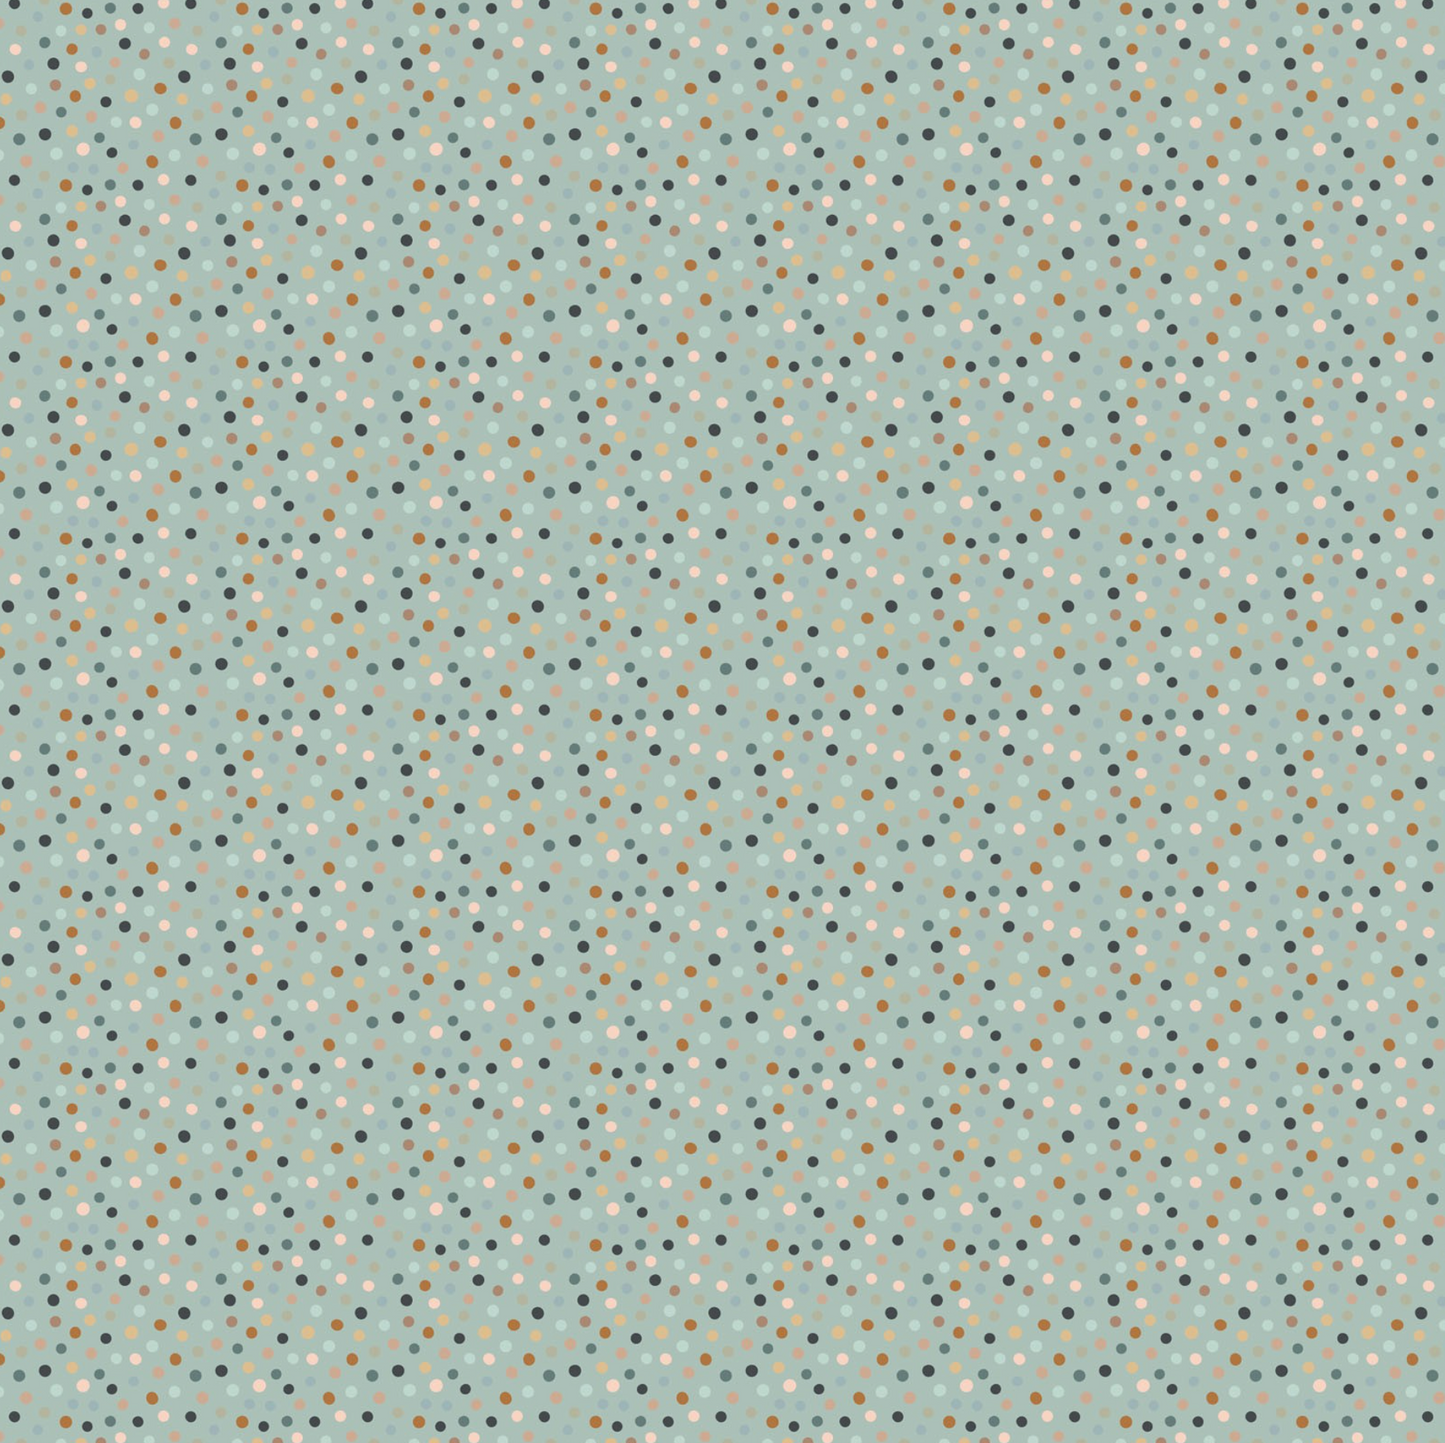 House and Home, HH22170 Dotty Green, sold by the 1/2 yard